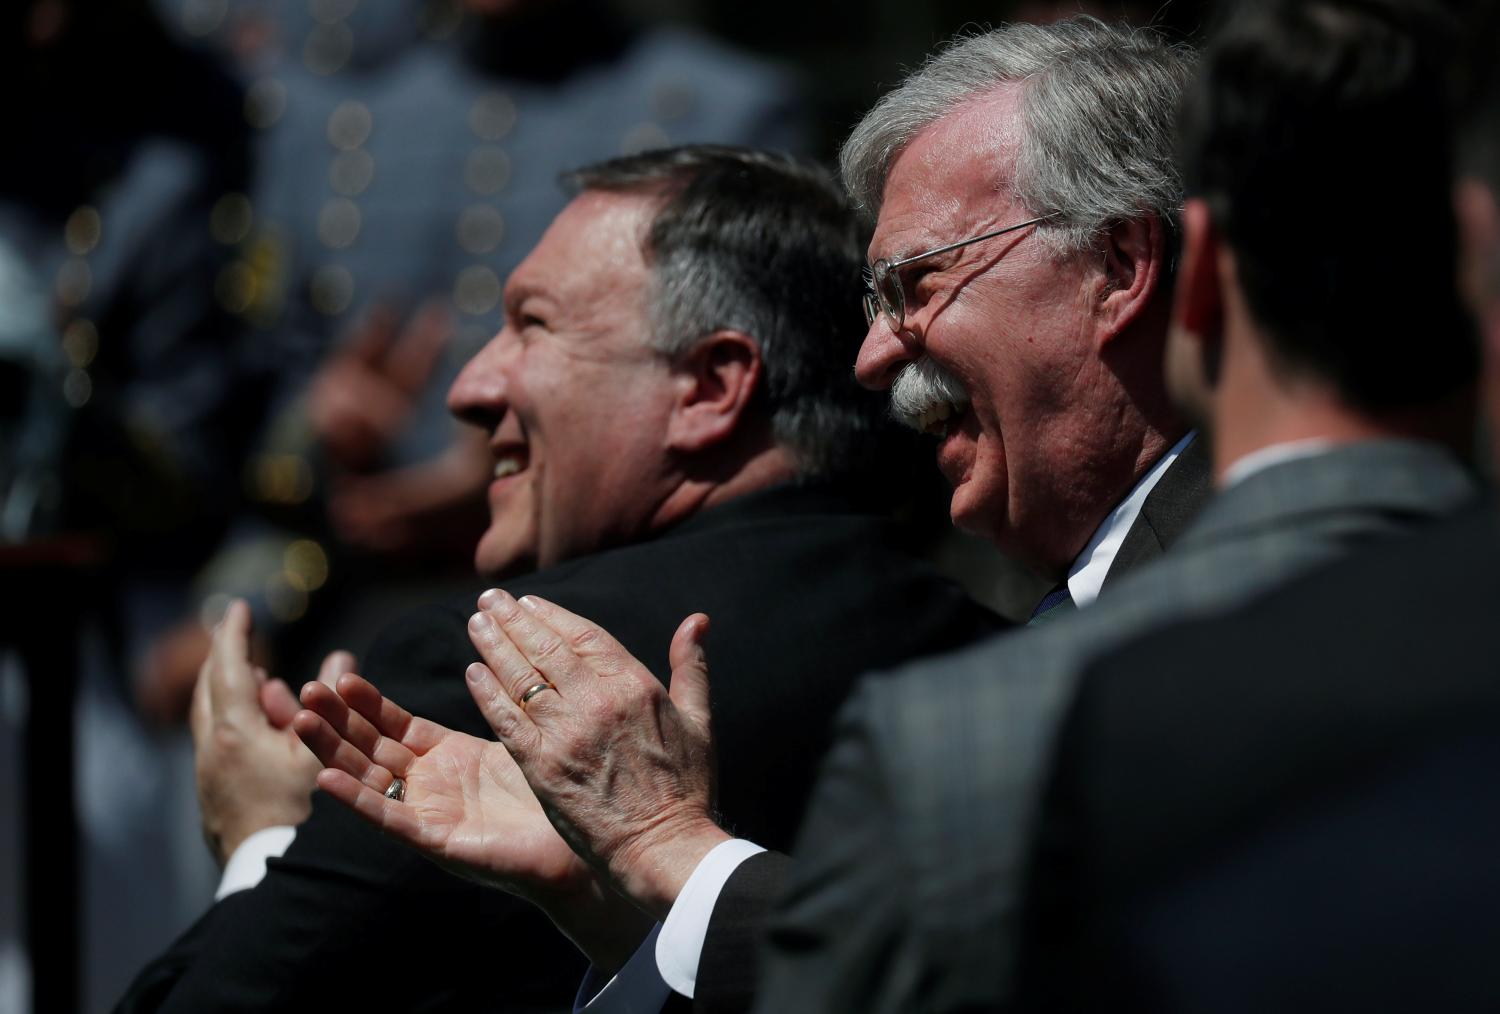 U.S. Secretary of State Mike Pompeo and National Security Advisor John Bolton applaud as President Donald Trump presents the Commander-in-Chief's Trophy to the U.S. Military Academy football team in the Rose Garden at the White House in Washington, U.S., May 1, 2018. REUTERS/Leah Millis - RC1DAD60CB00